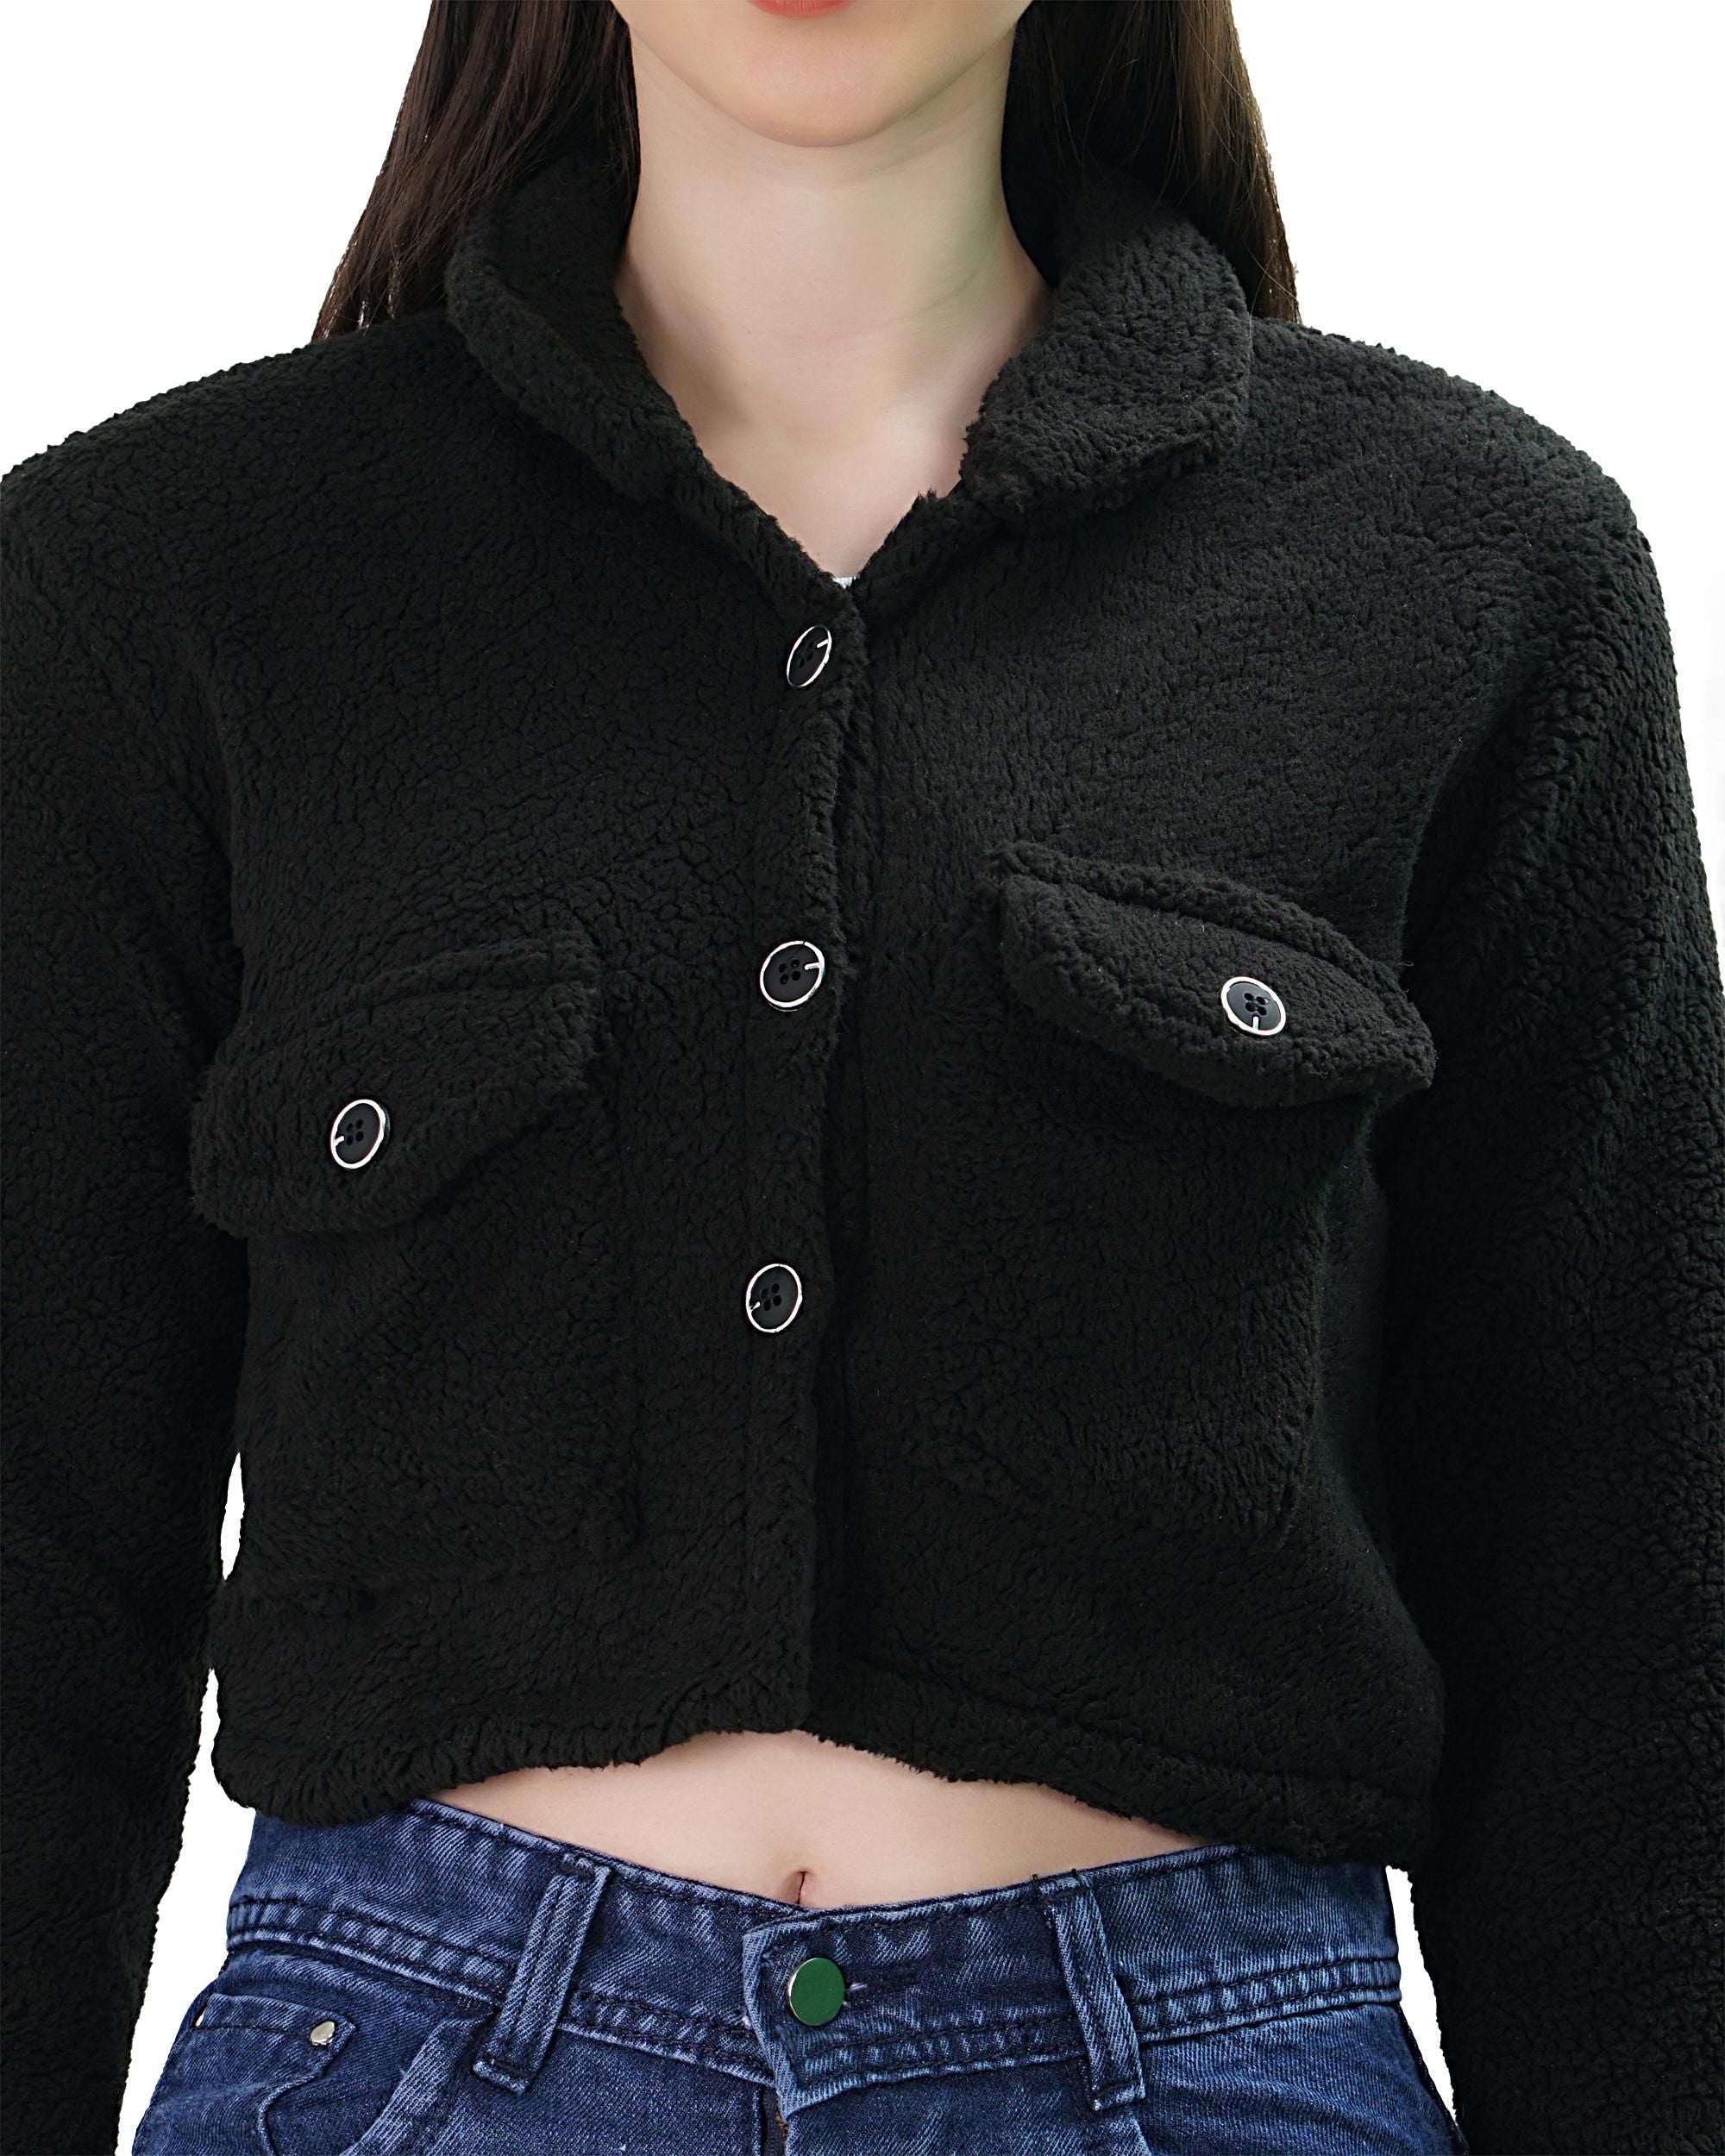 Lily Buds Wool Jacket For Women (Black)